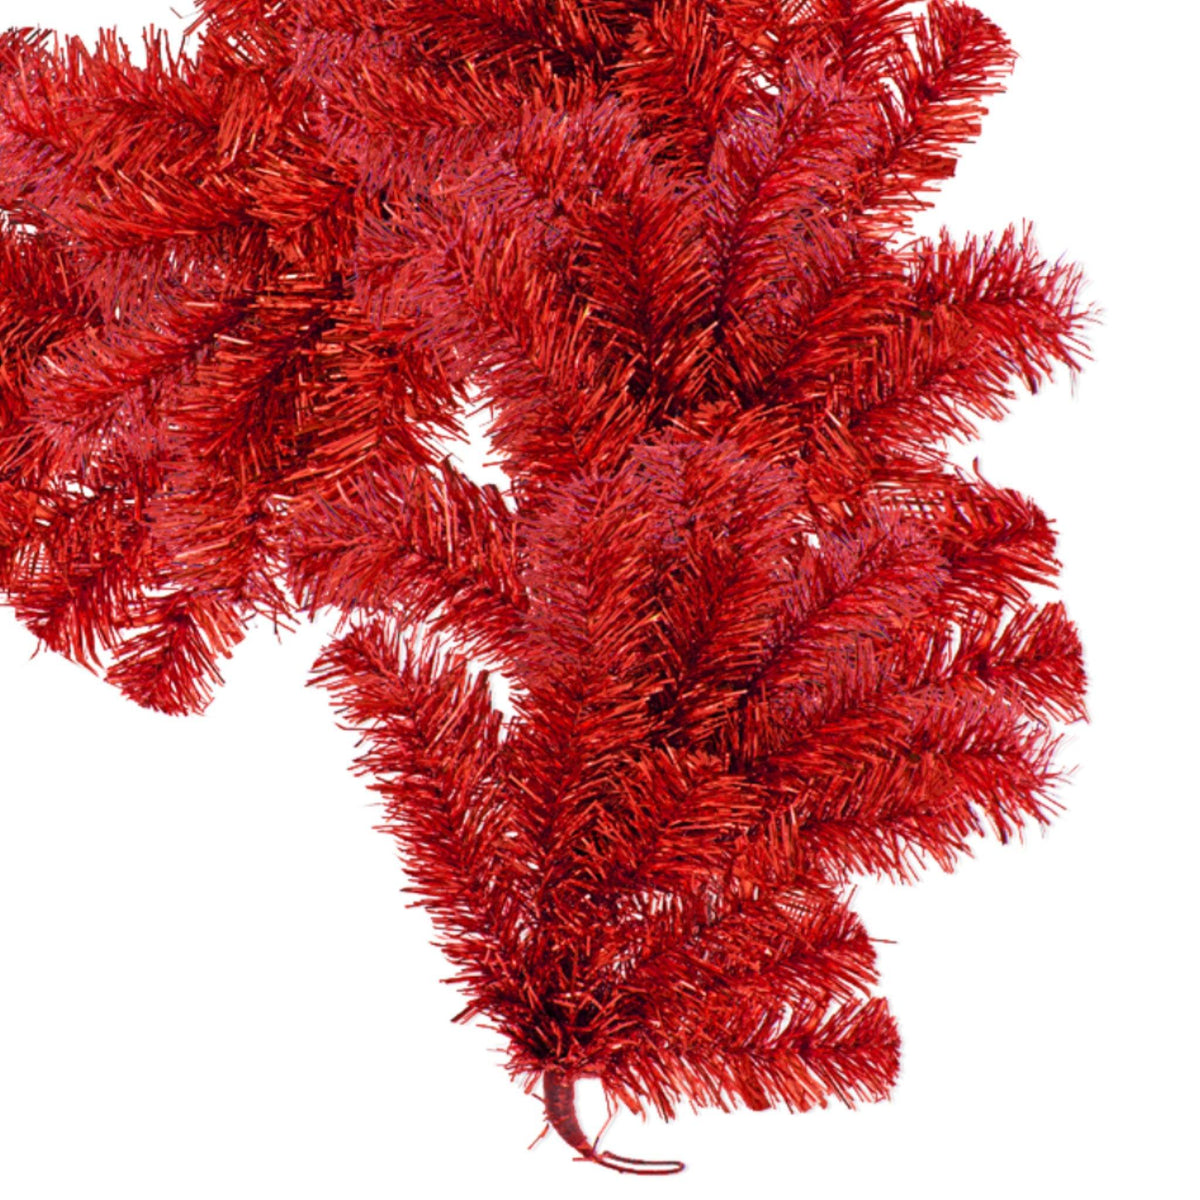 Shop for Lee Display's brand new 6FT Shiny Metallic Red Tinsel Brush Garlands on sale now at leedisplay.com.  Made on a wire